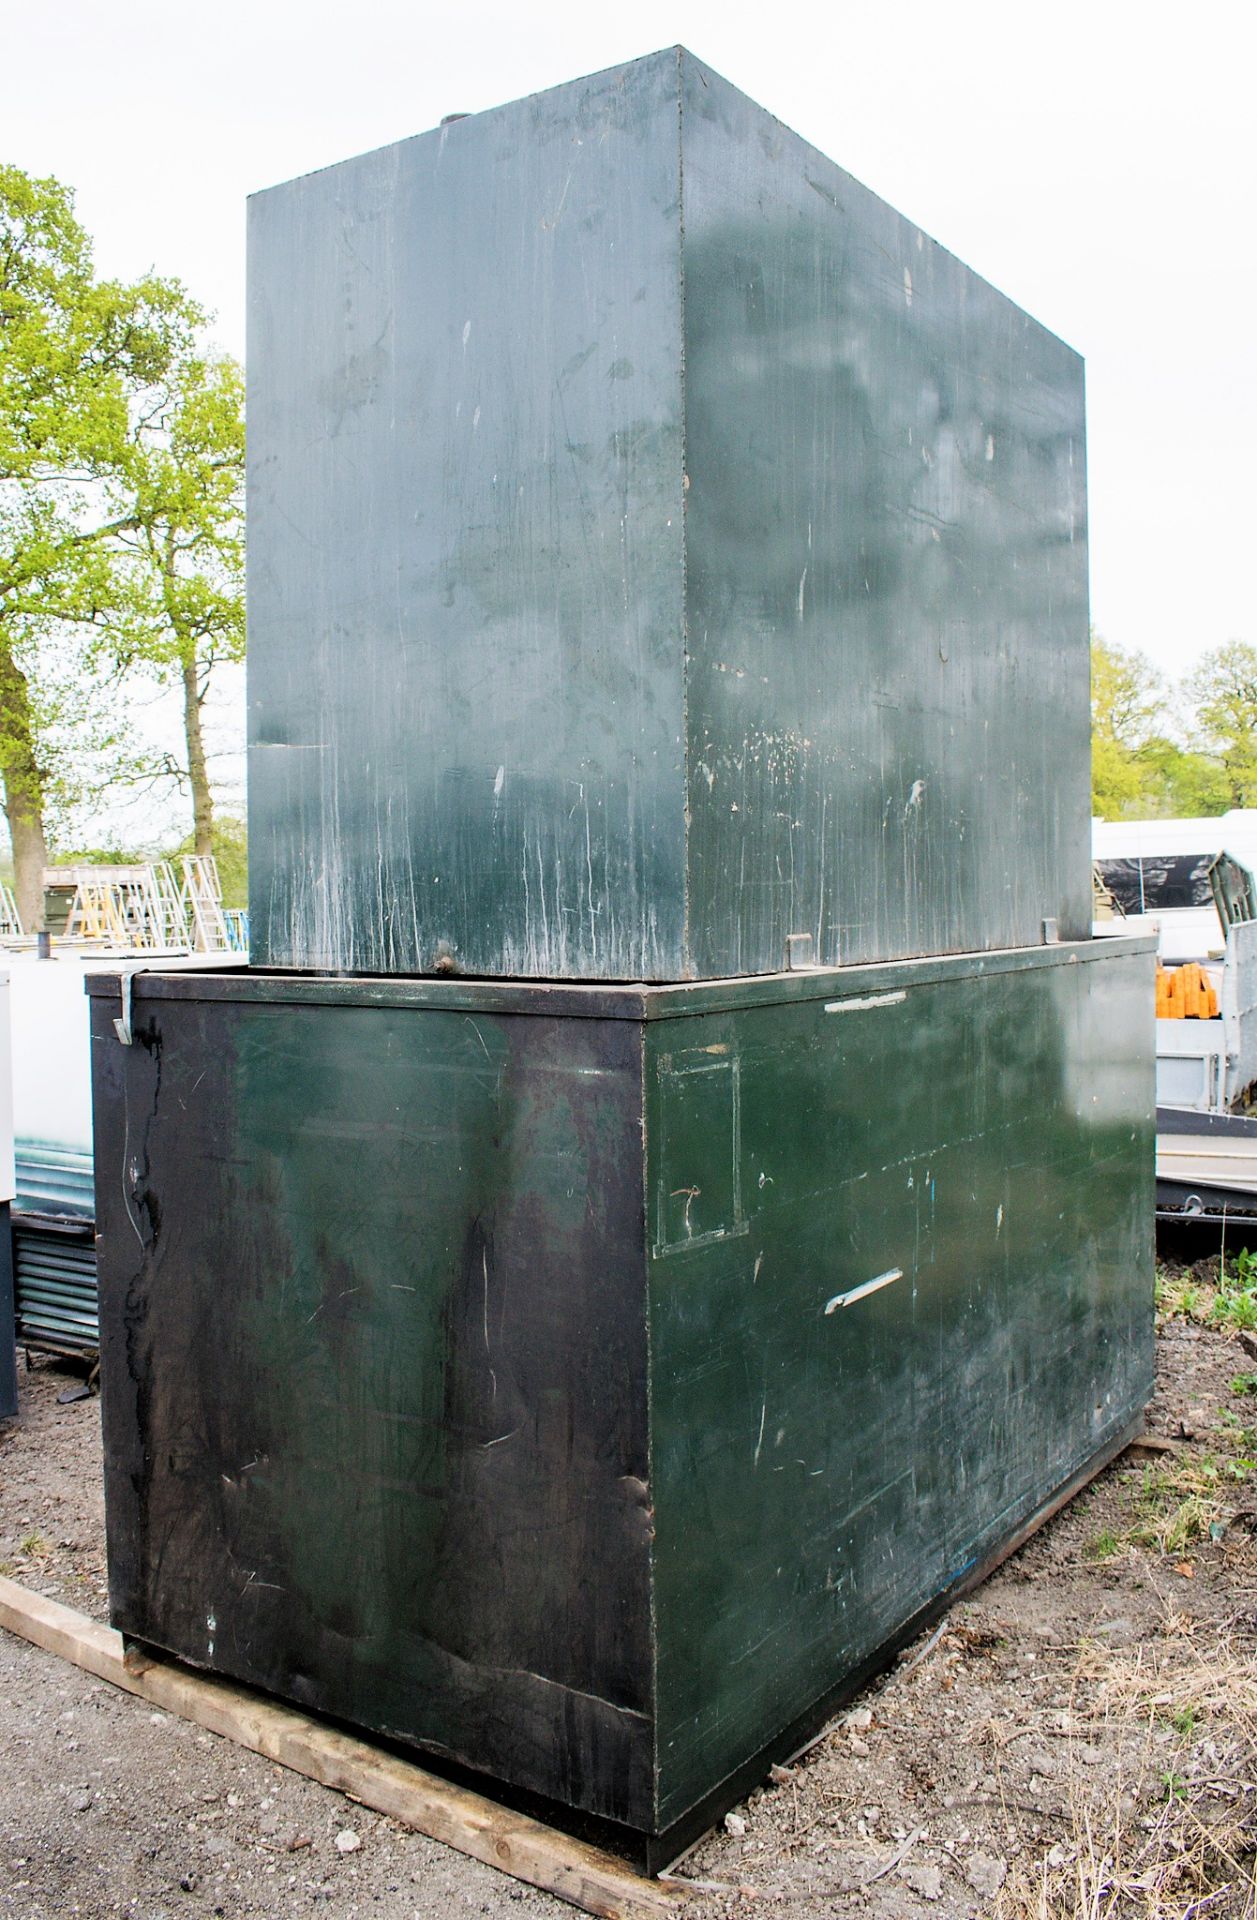 Diesel storage tank c/w bund/catch tank ** No VAT on hammer price but VAT will be charged on the - Image 2 of 2